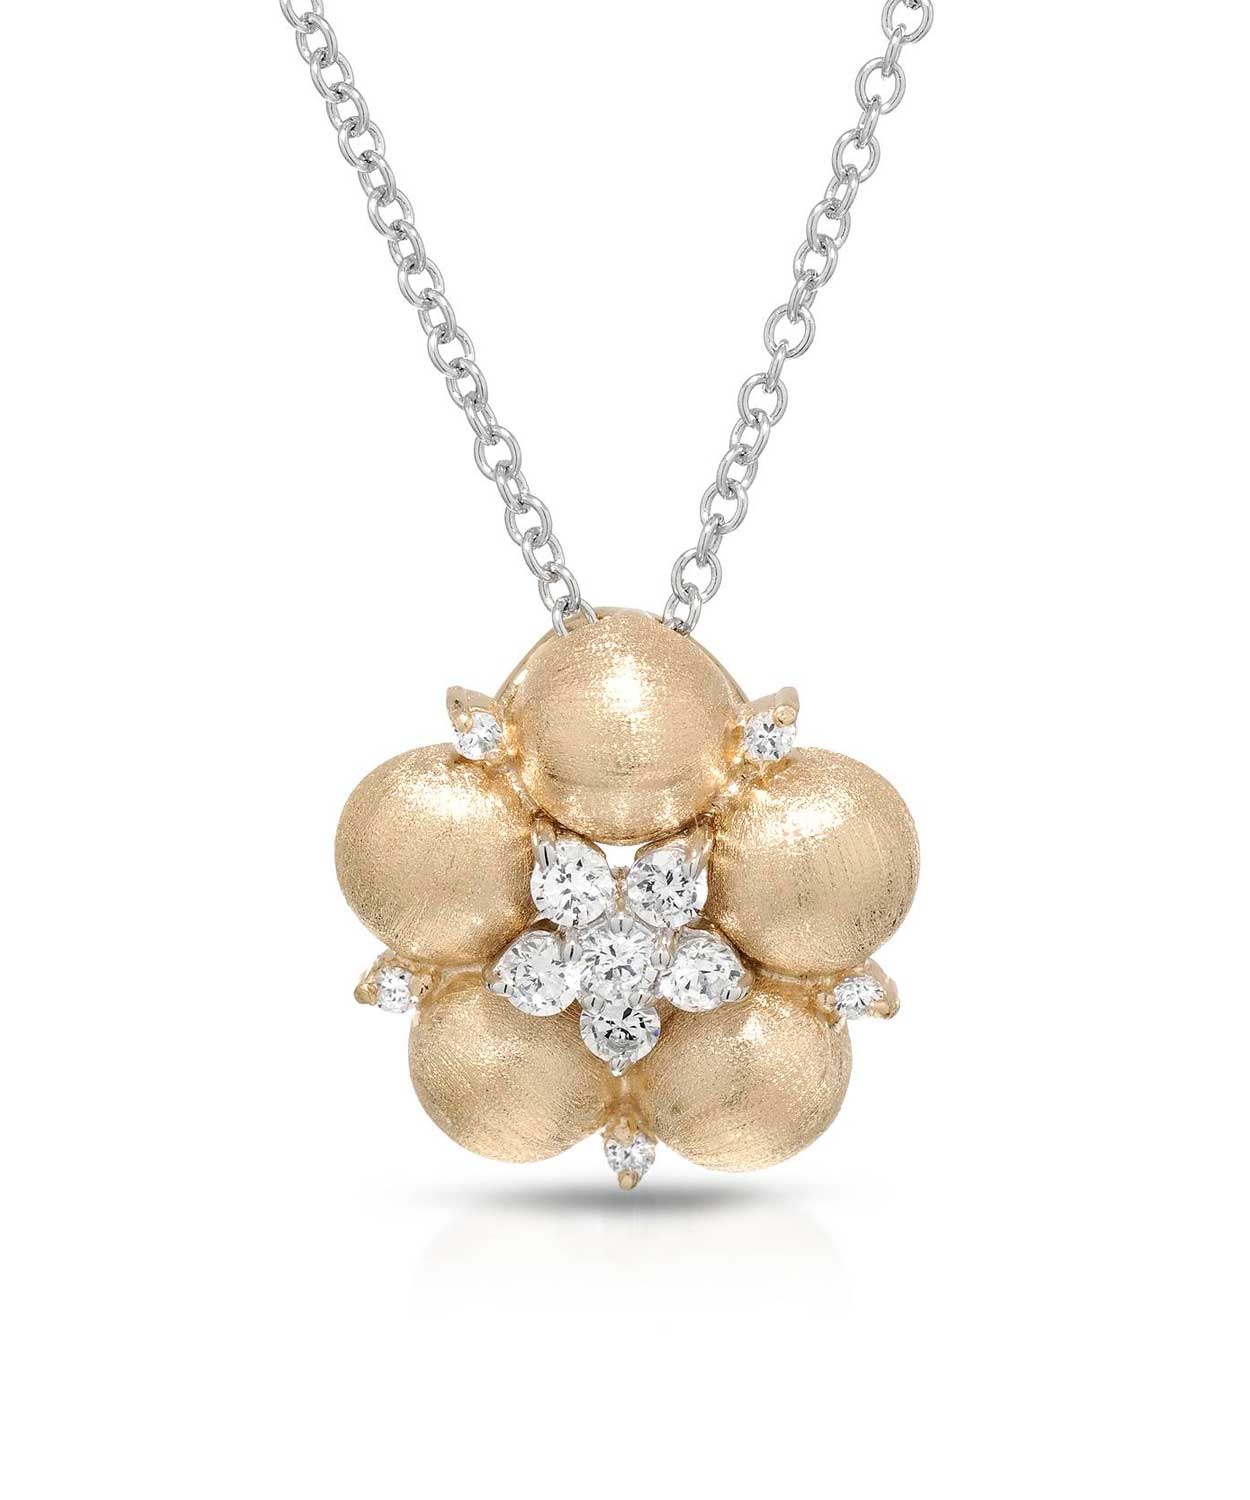 Brilliant Cut Cubic Zirconia 14k Gold Plated 925 Sterling Silver Flower Pendant With Chain View 1